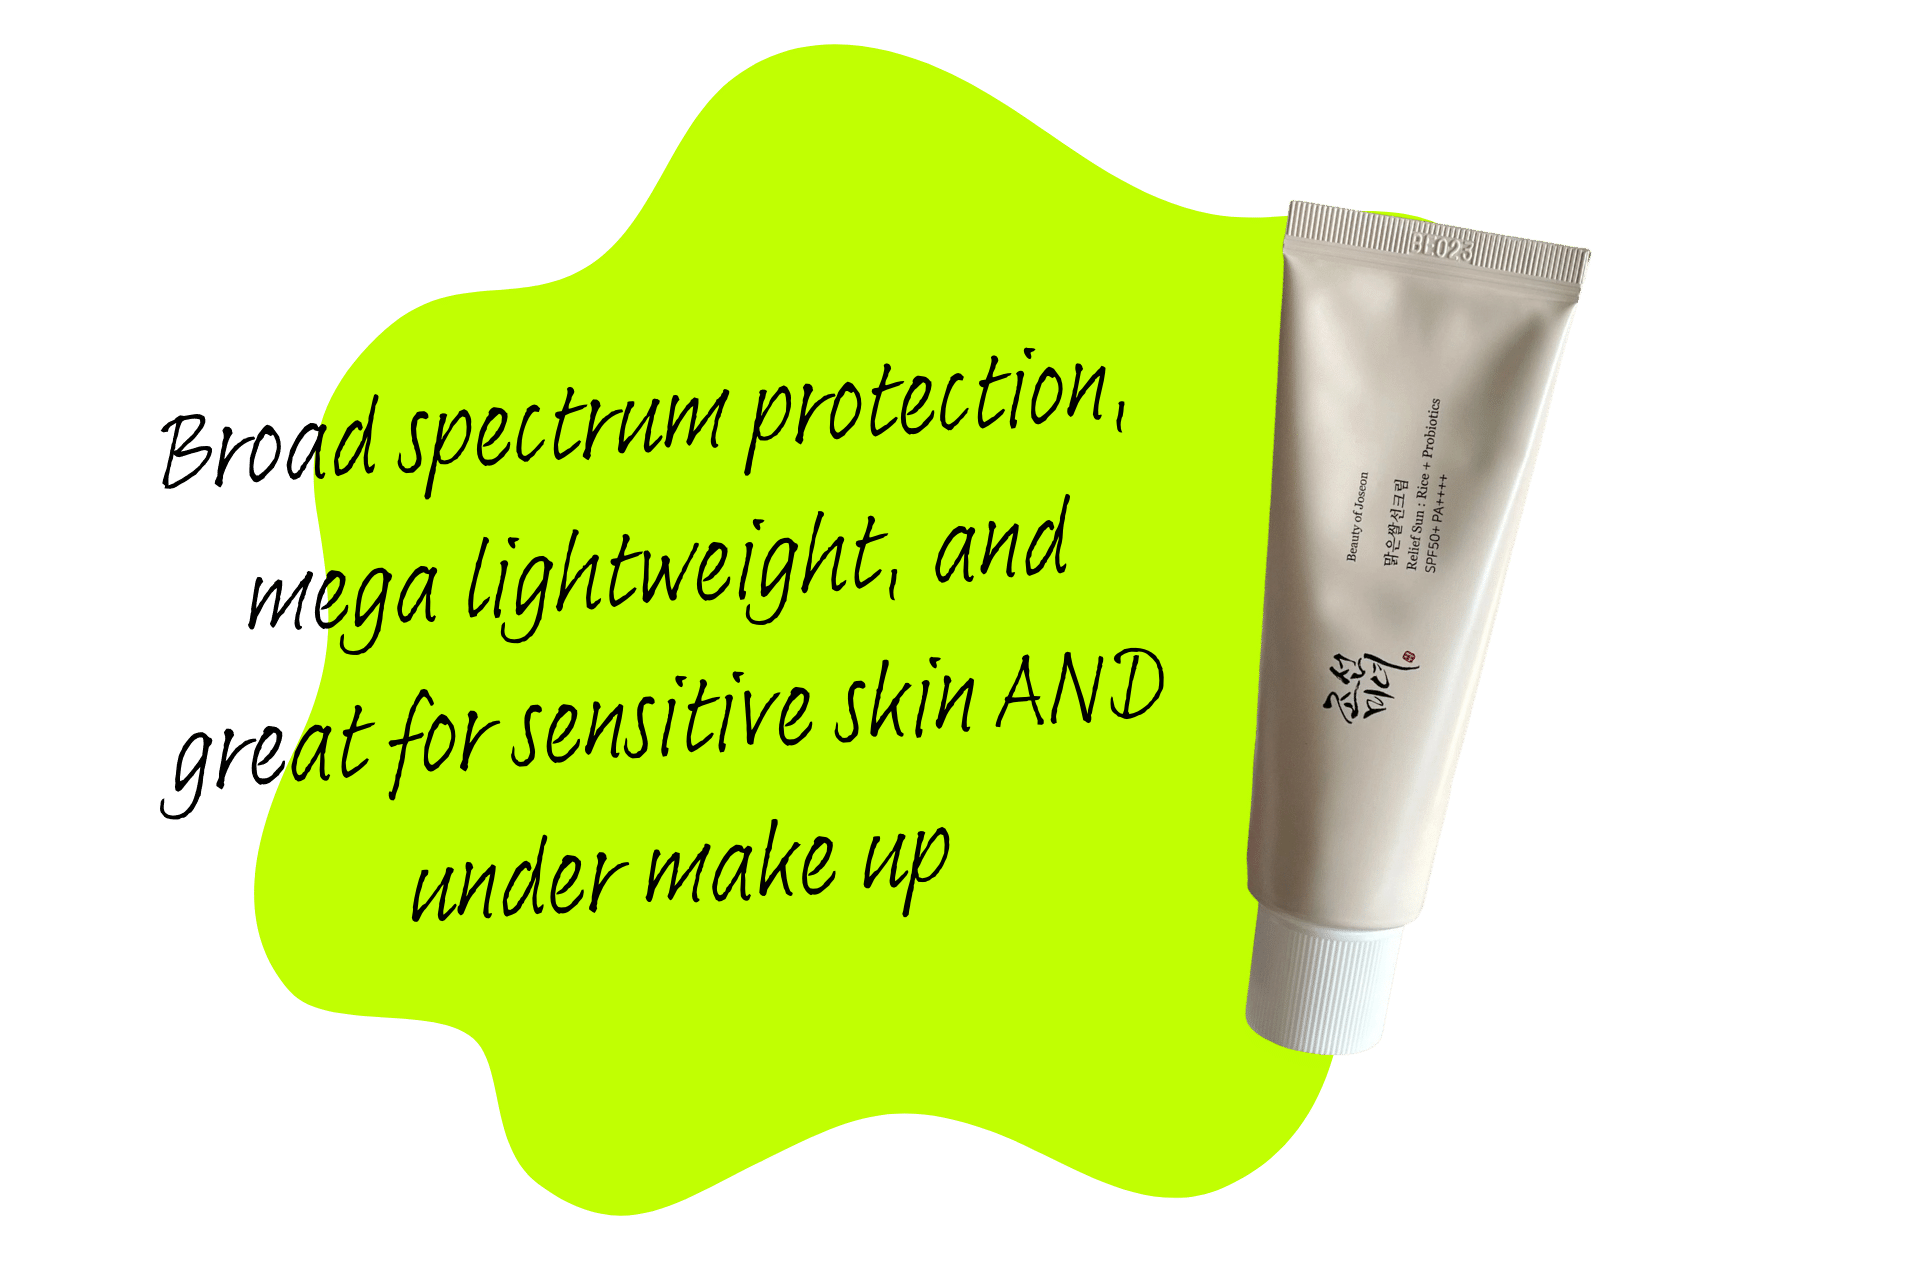 Beauty of Joseon has broad spectrum protection, is mega lightweight, and great for sensitive skin and under make up, making it one of the best sunscreens right now.